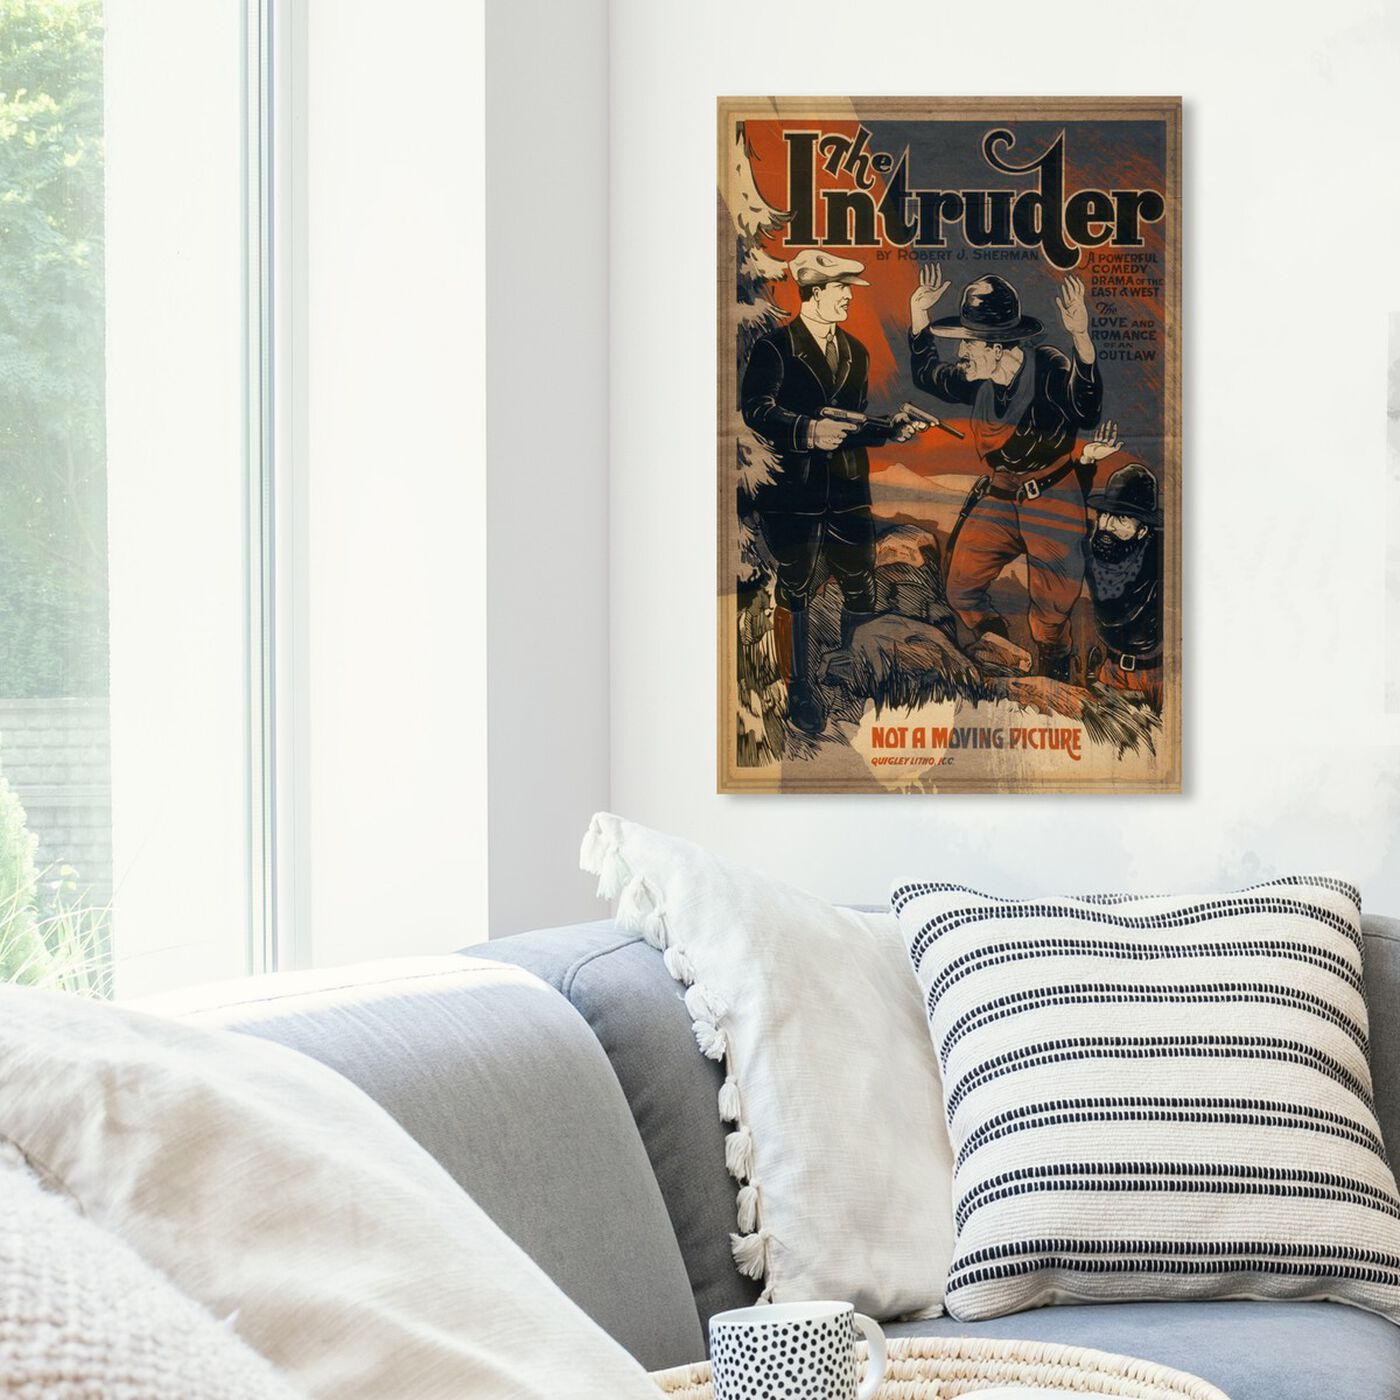 Hanging view of The Intruder featuring advertising and posters art.